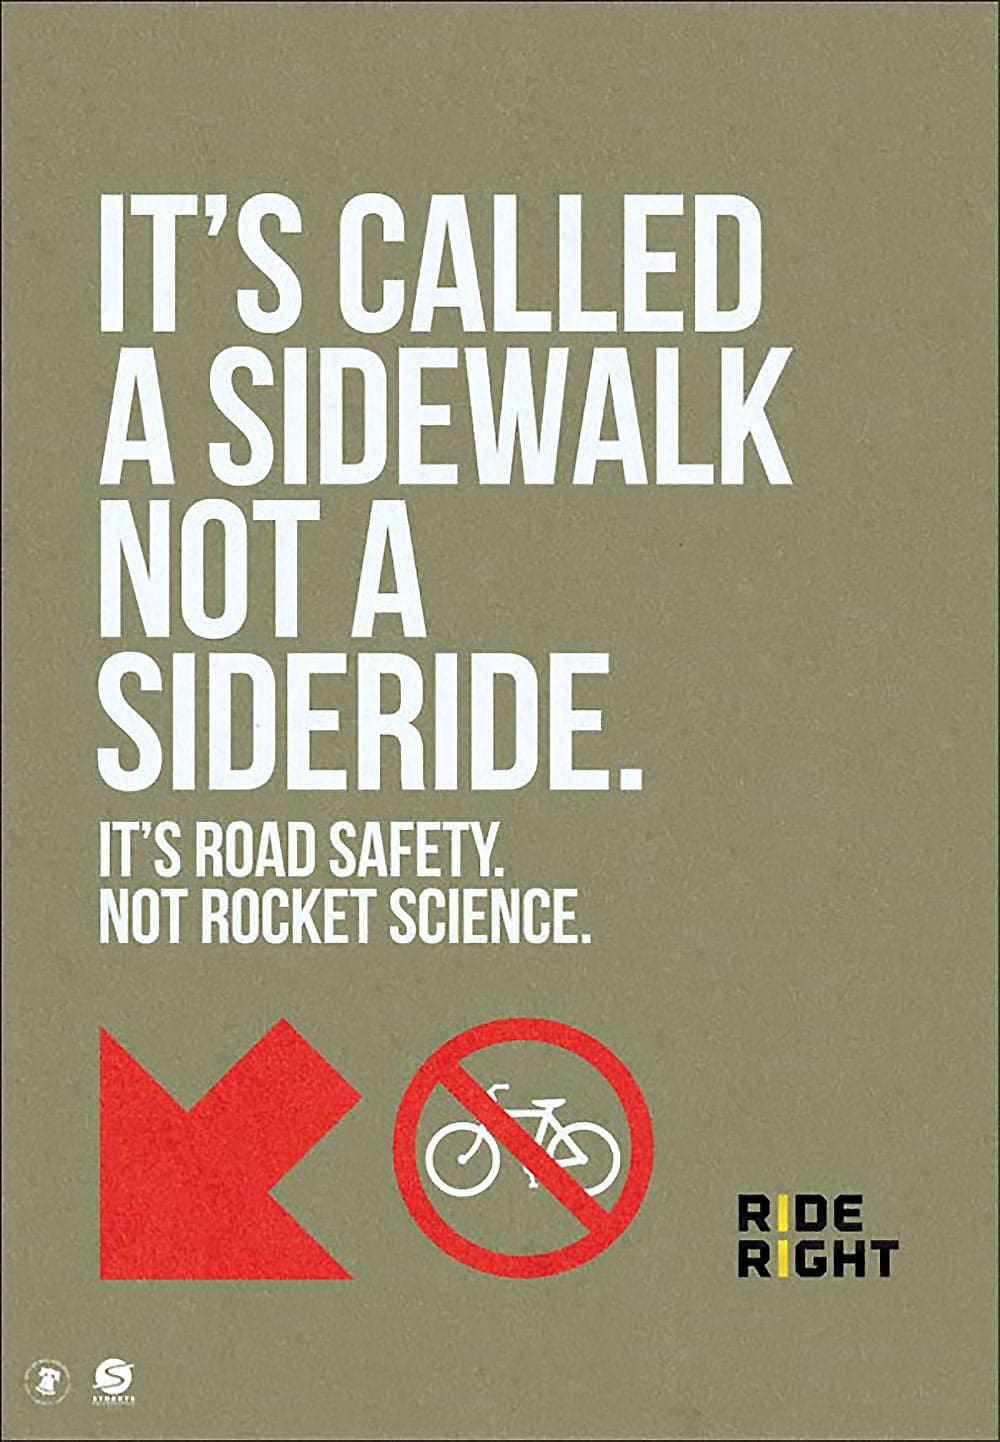 It’s road safety. Not rocket science